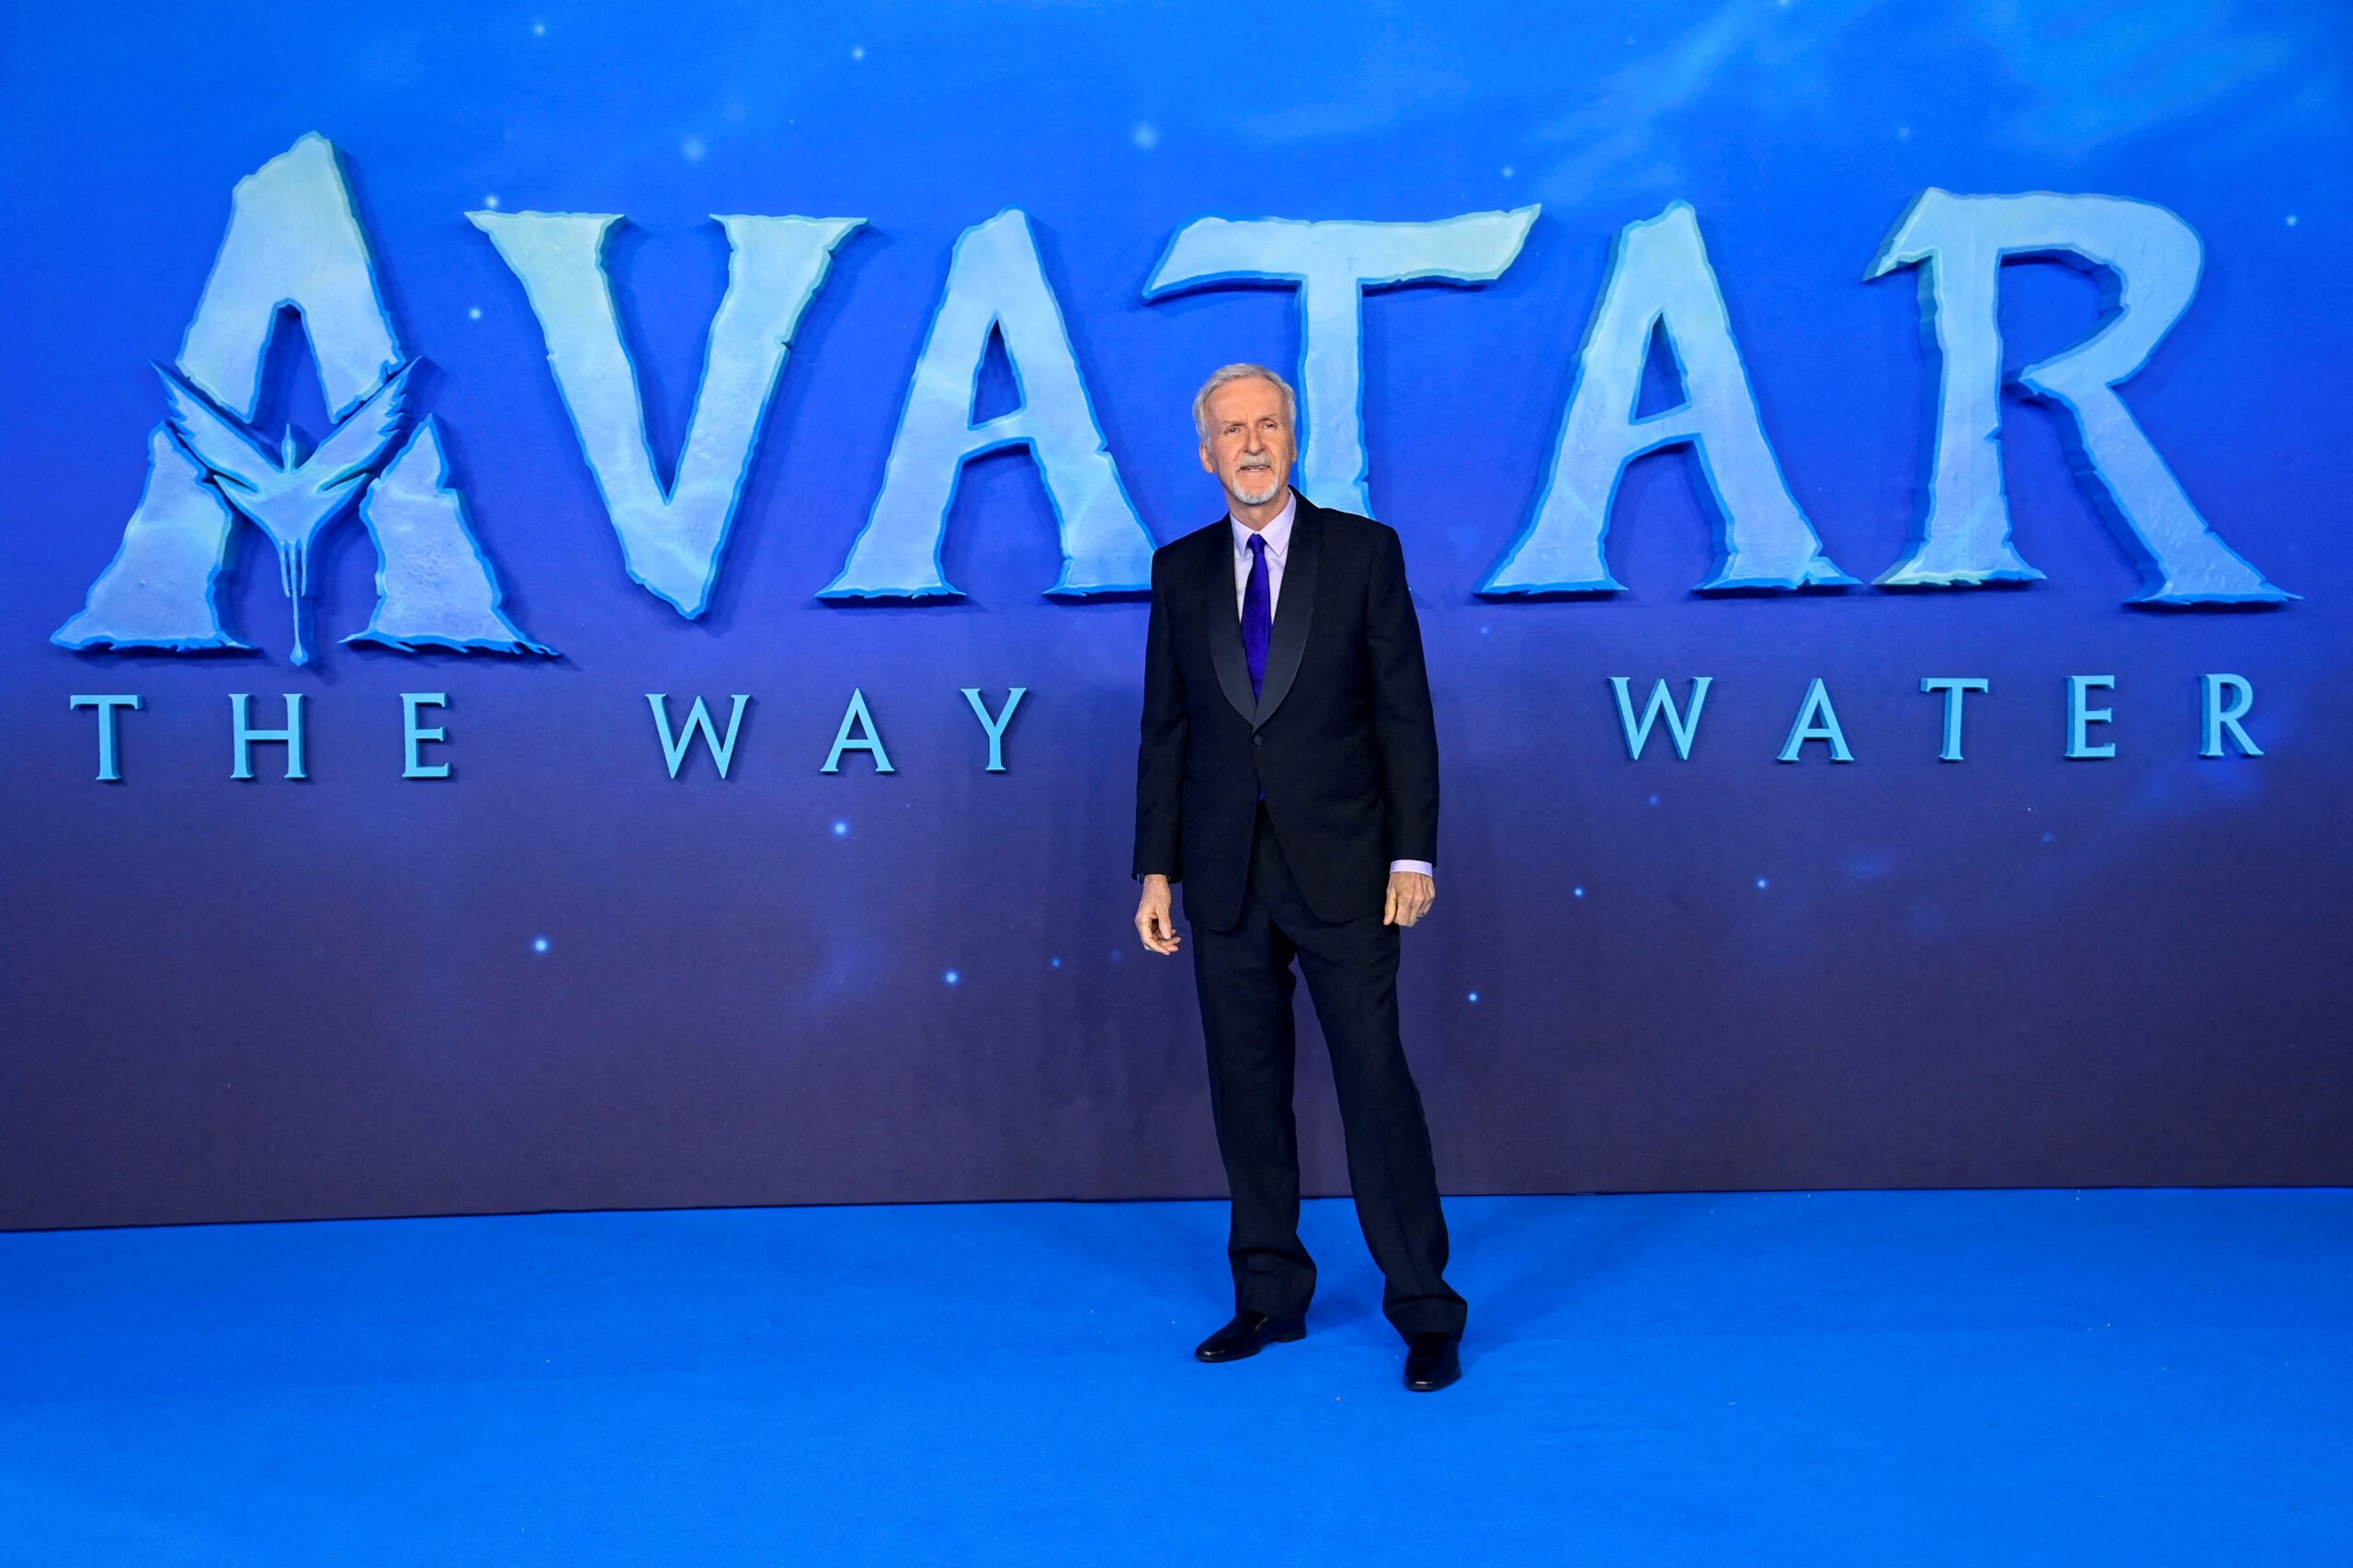 Box office haul for ‘Avatar: The Way of Water’ tops $2 billion